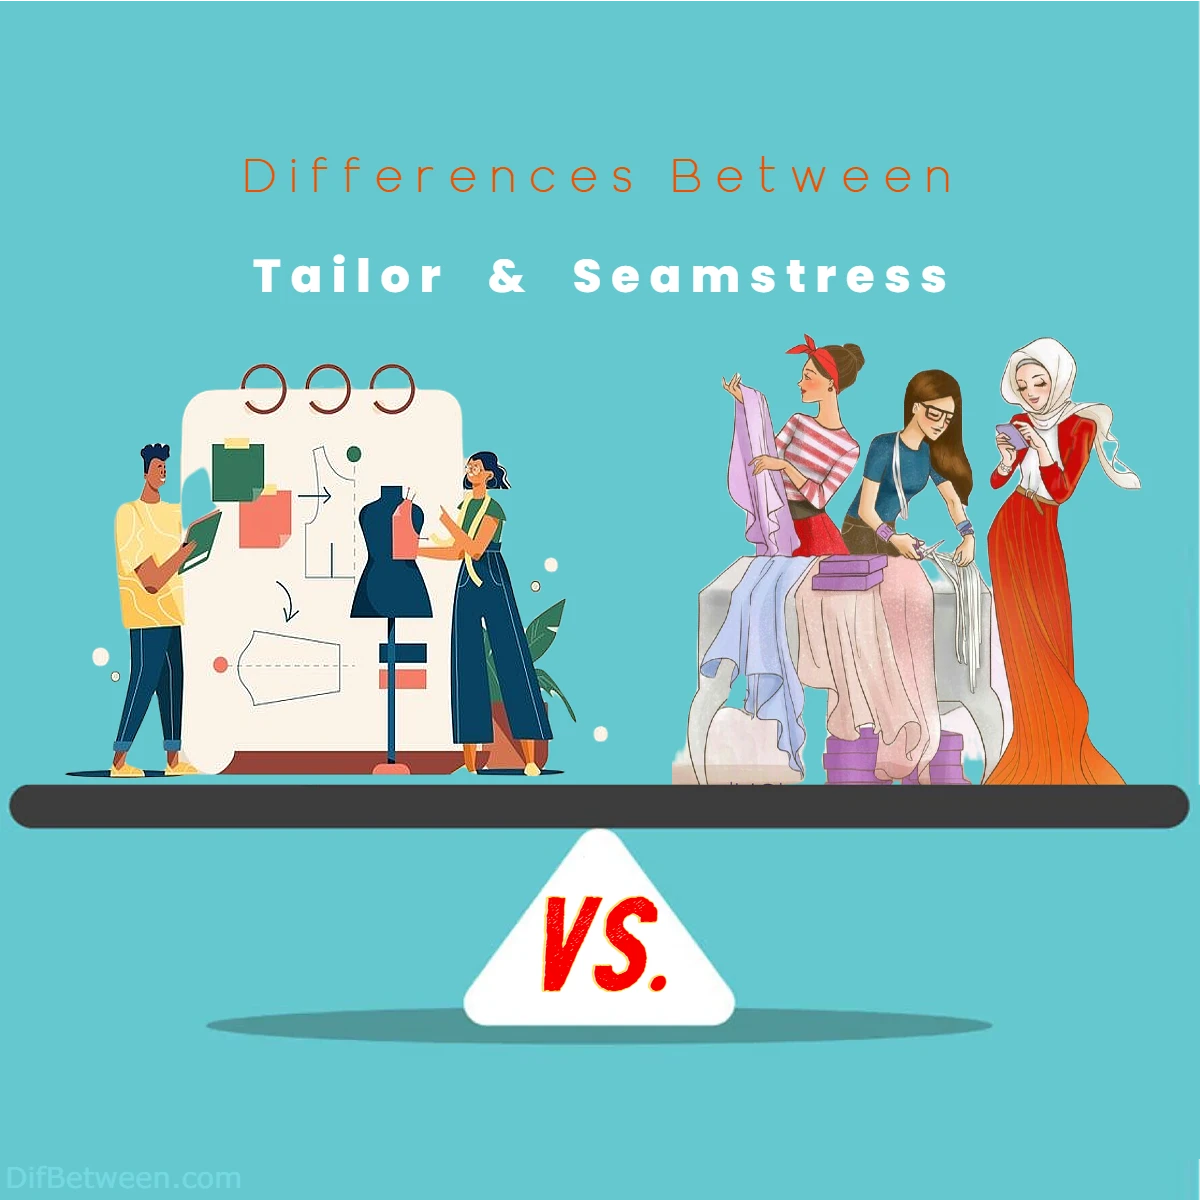 Differences Between Tailor vs Seamstress